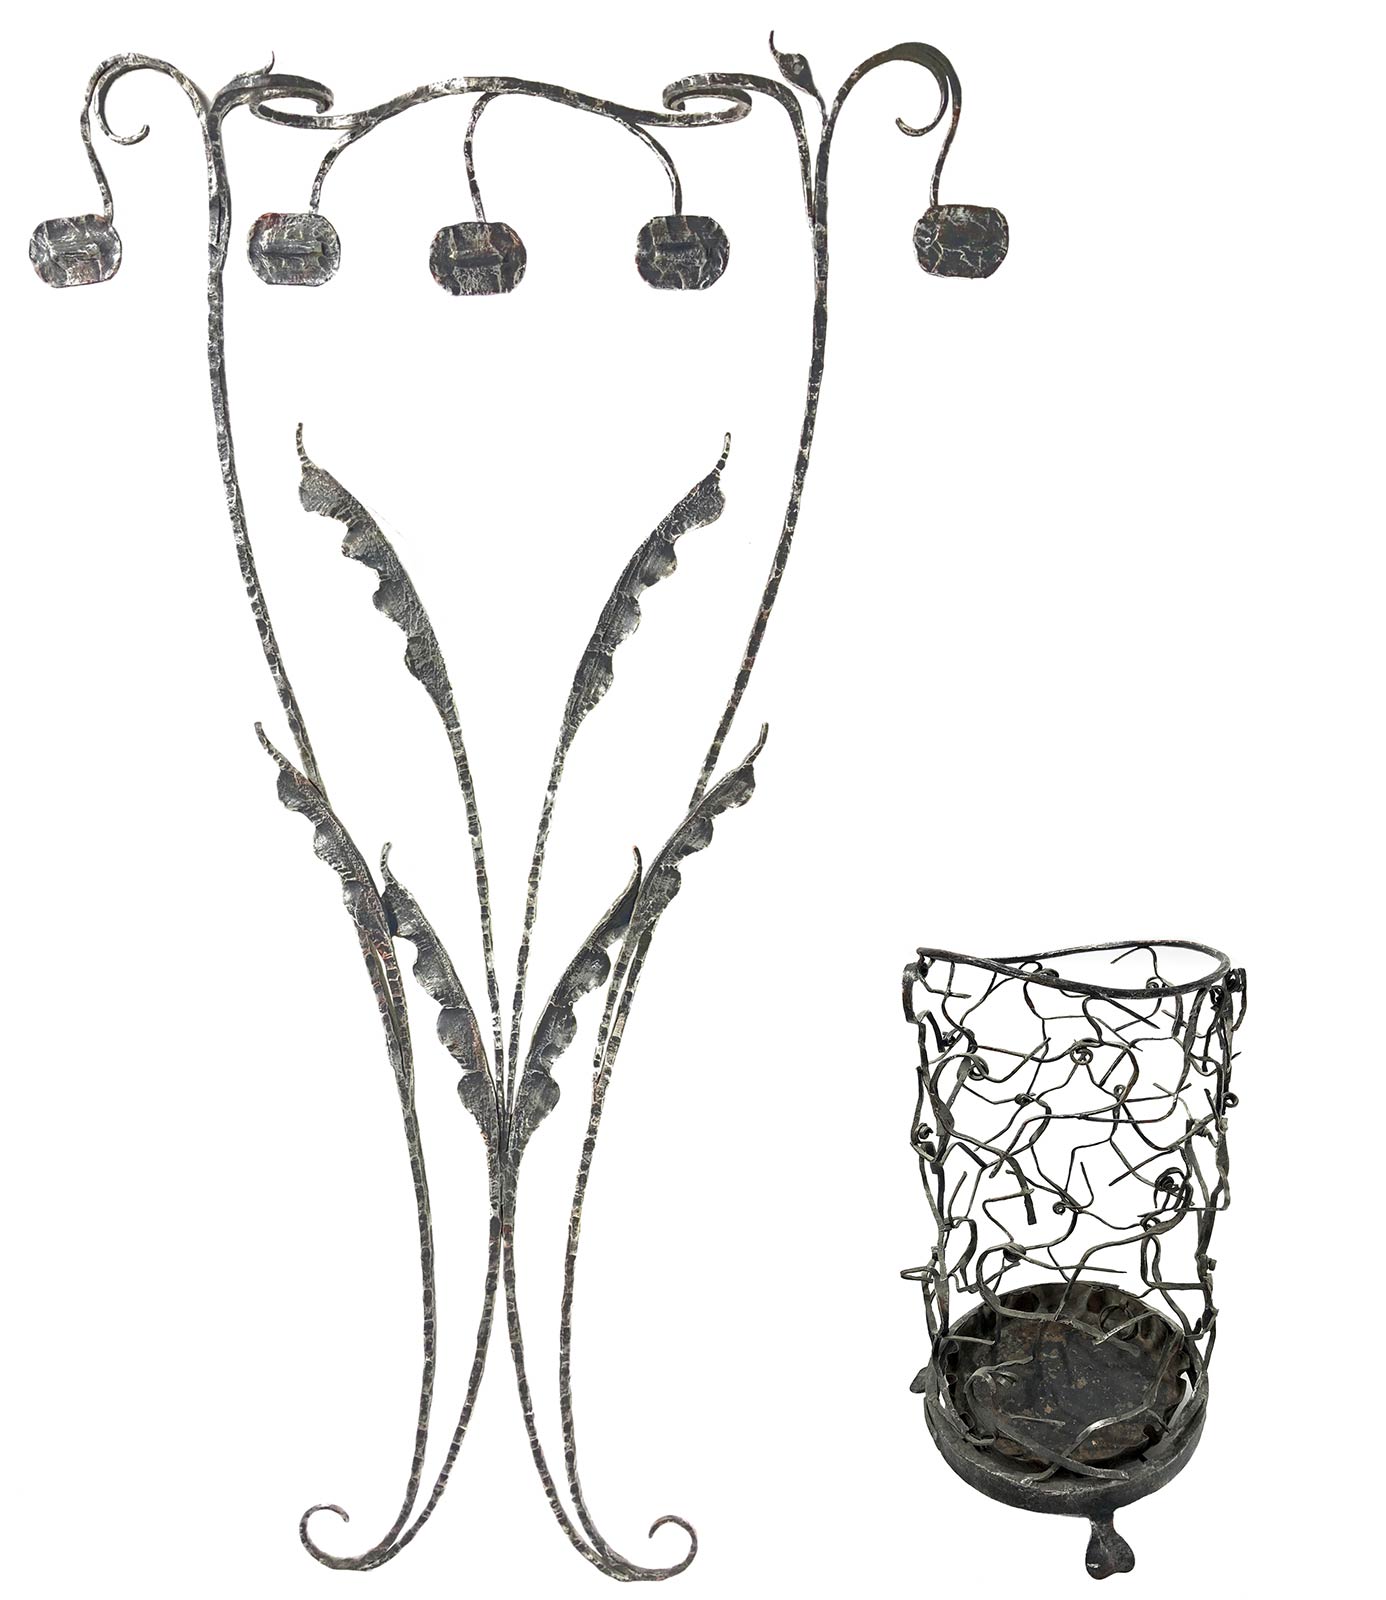 Salvino Marsura, clothes hanger and umbrella wrought iron with plant decorations. Years' 60.